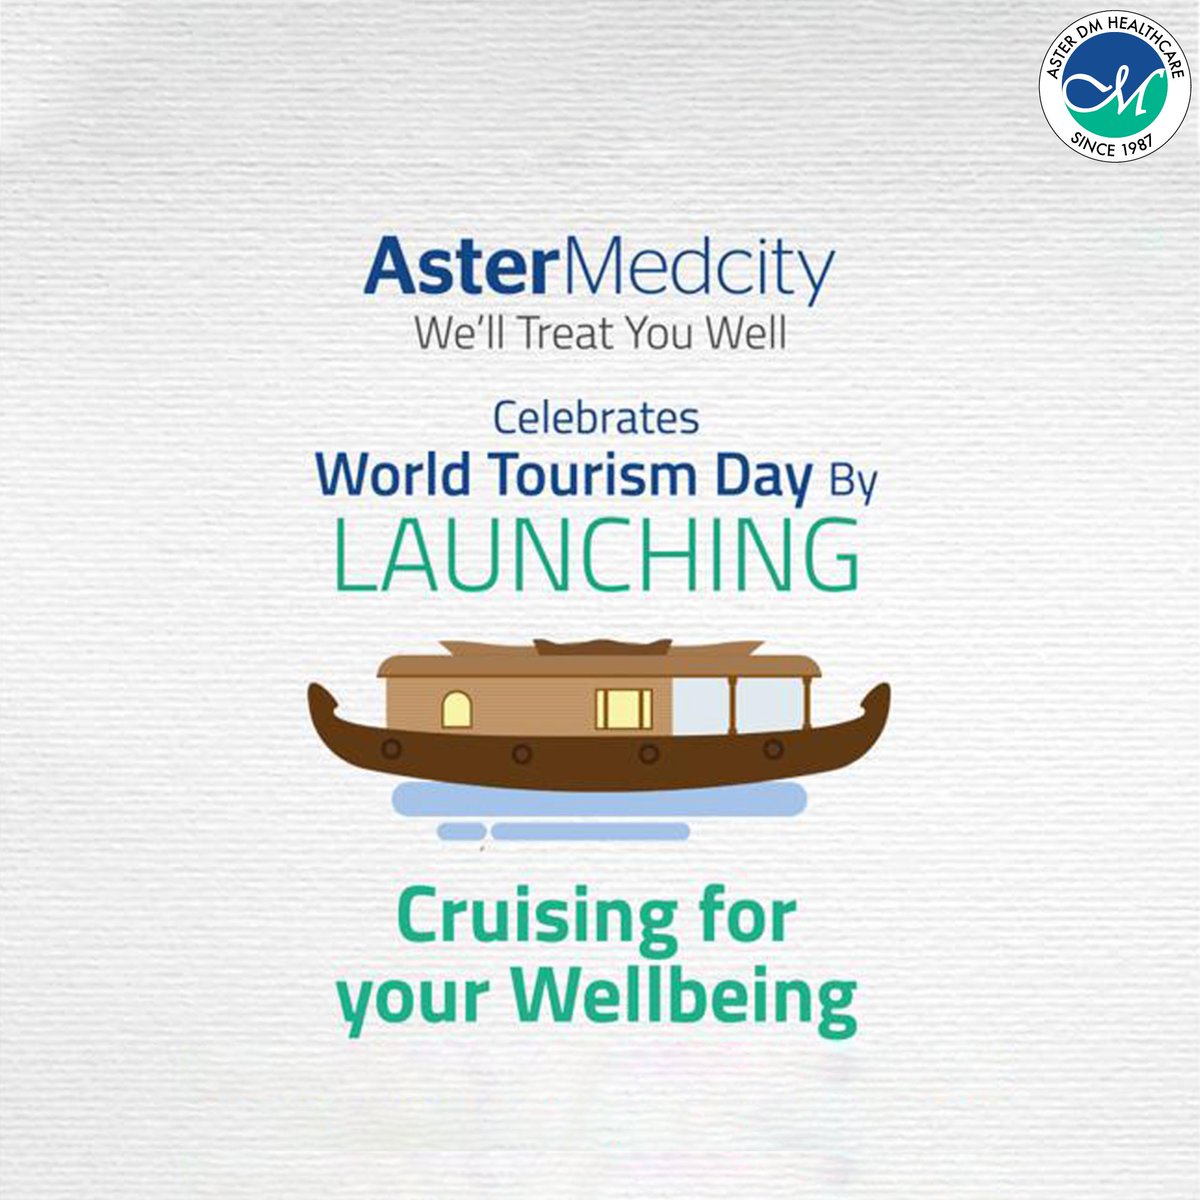 Aster Medcity celebrates World Tourism Day with a new health initiative